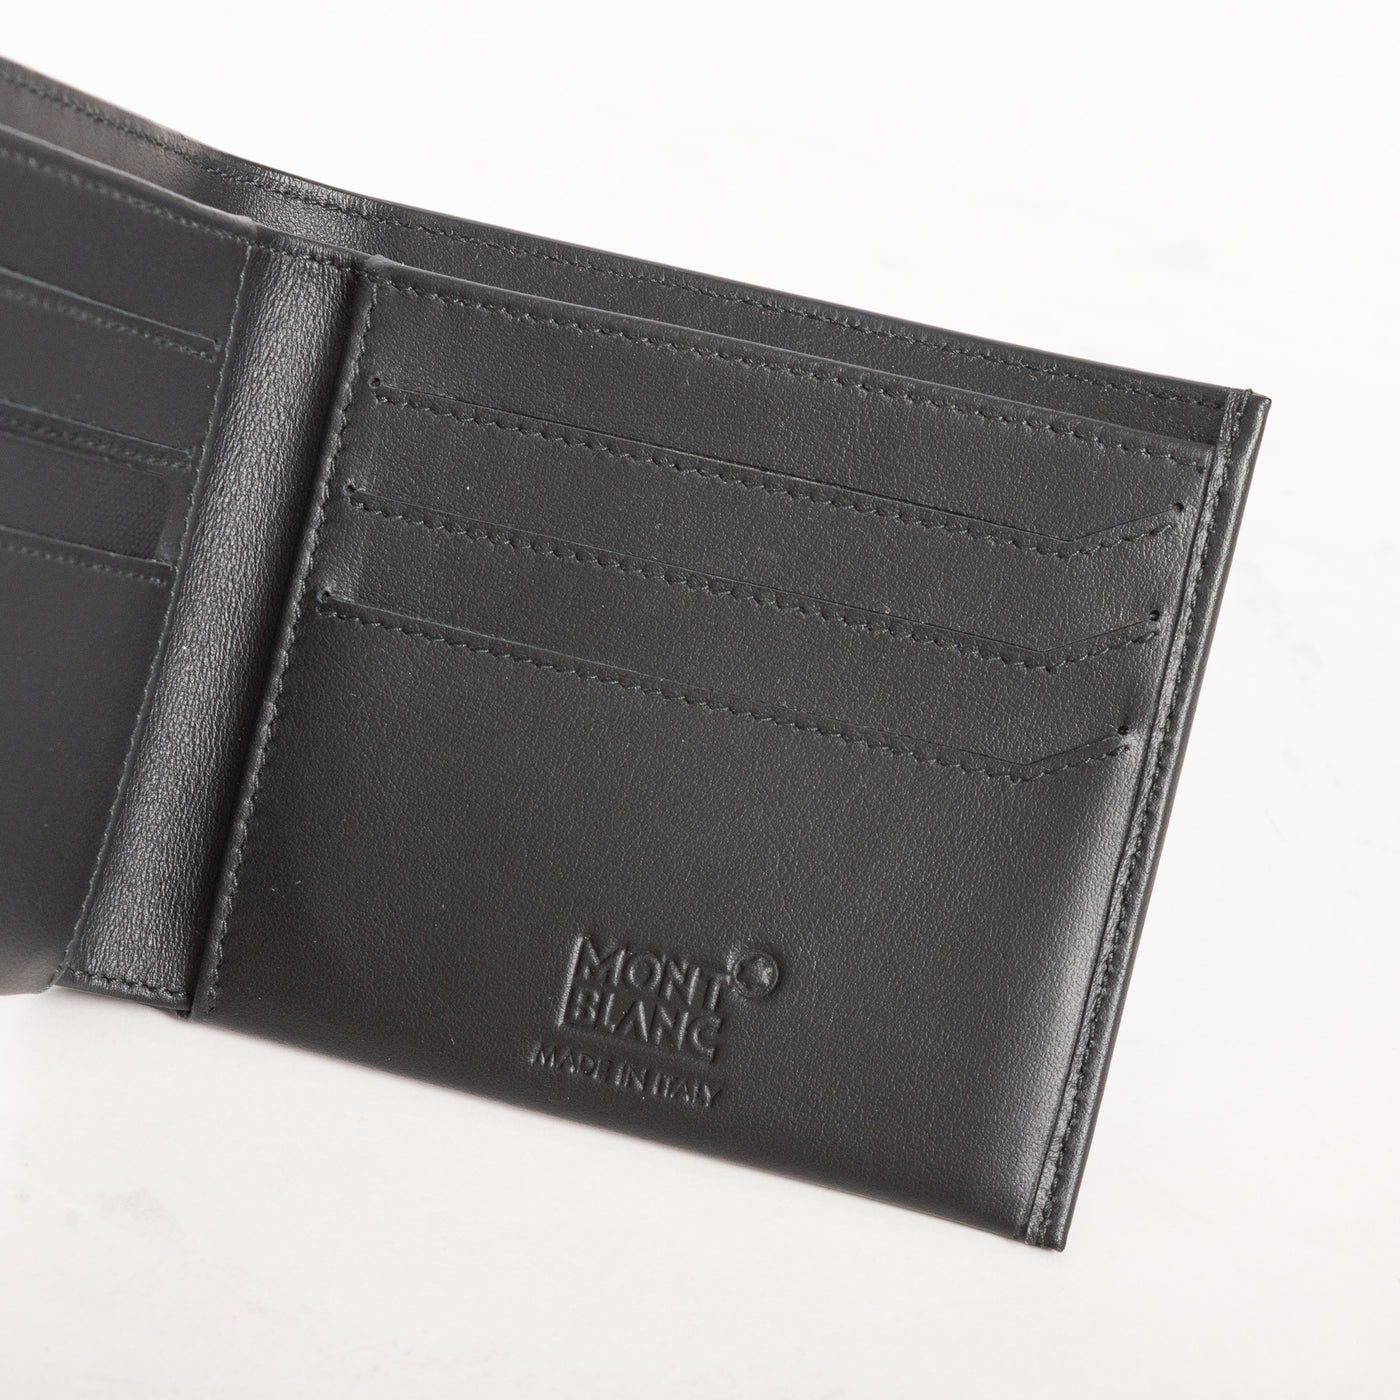 Montblanc Leather Goods Nightflight Black 6cc Wallet 118274 - Preowned Right Side